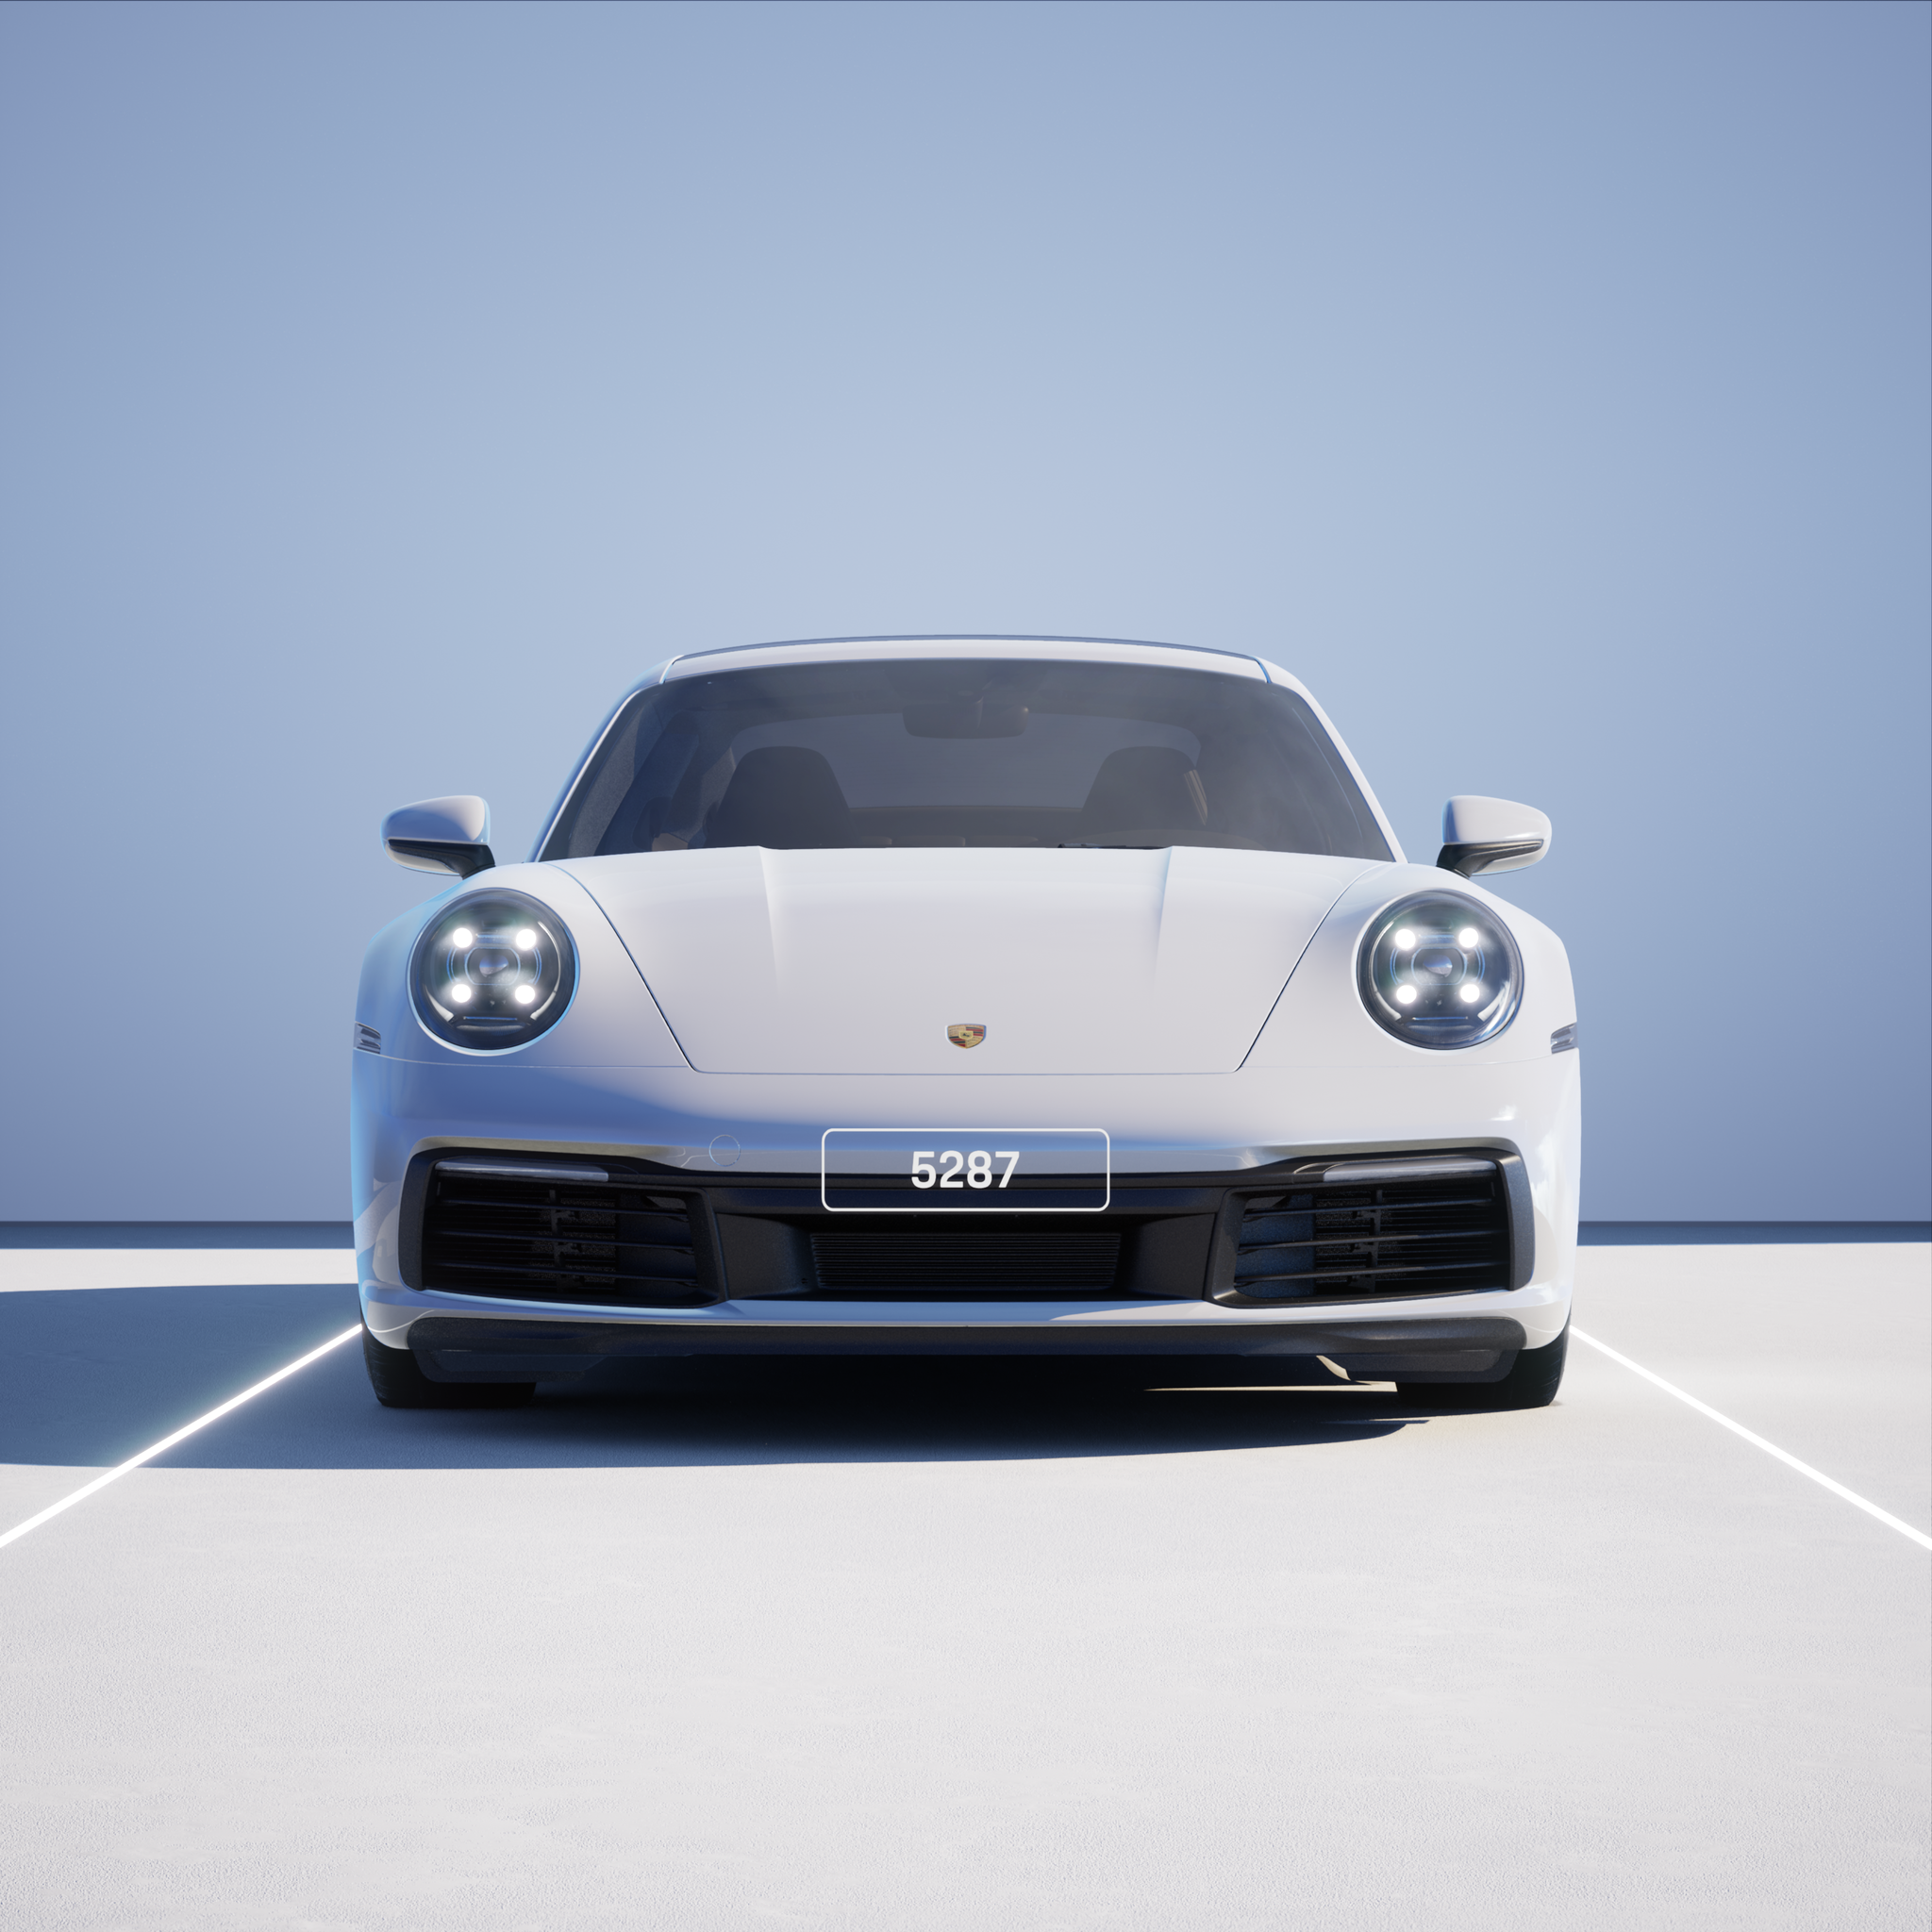 The PORSCHΞ 911 5287 image in phase